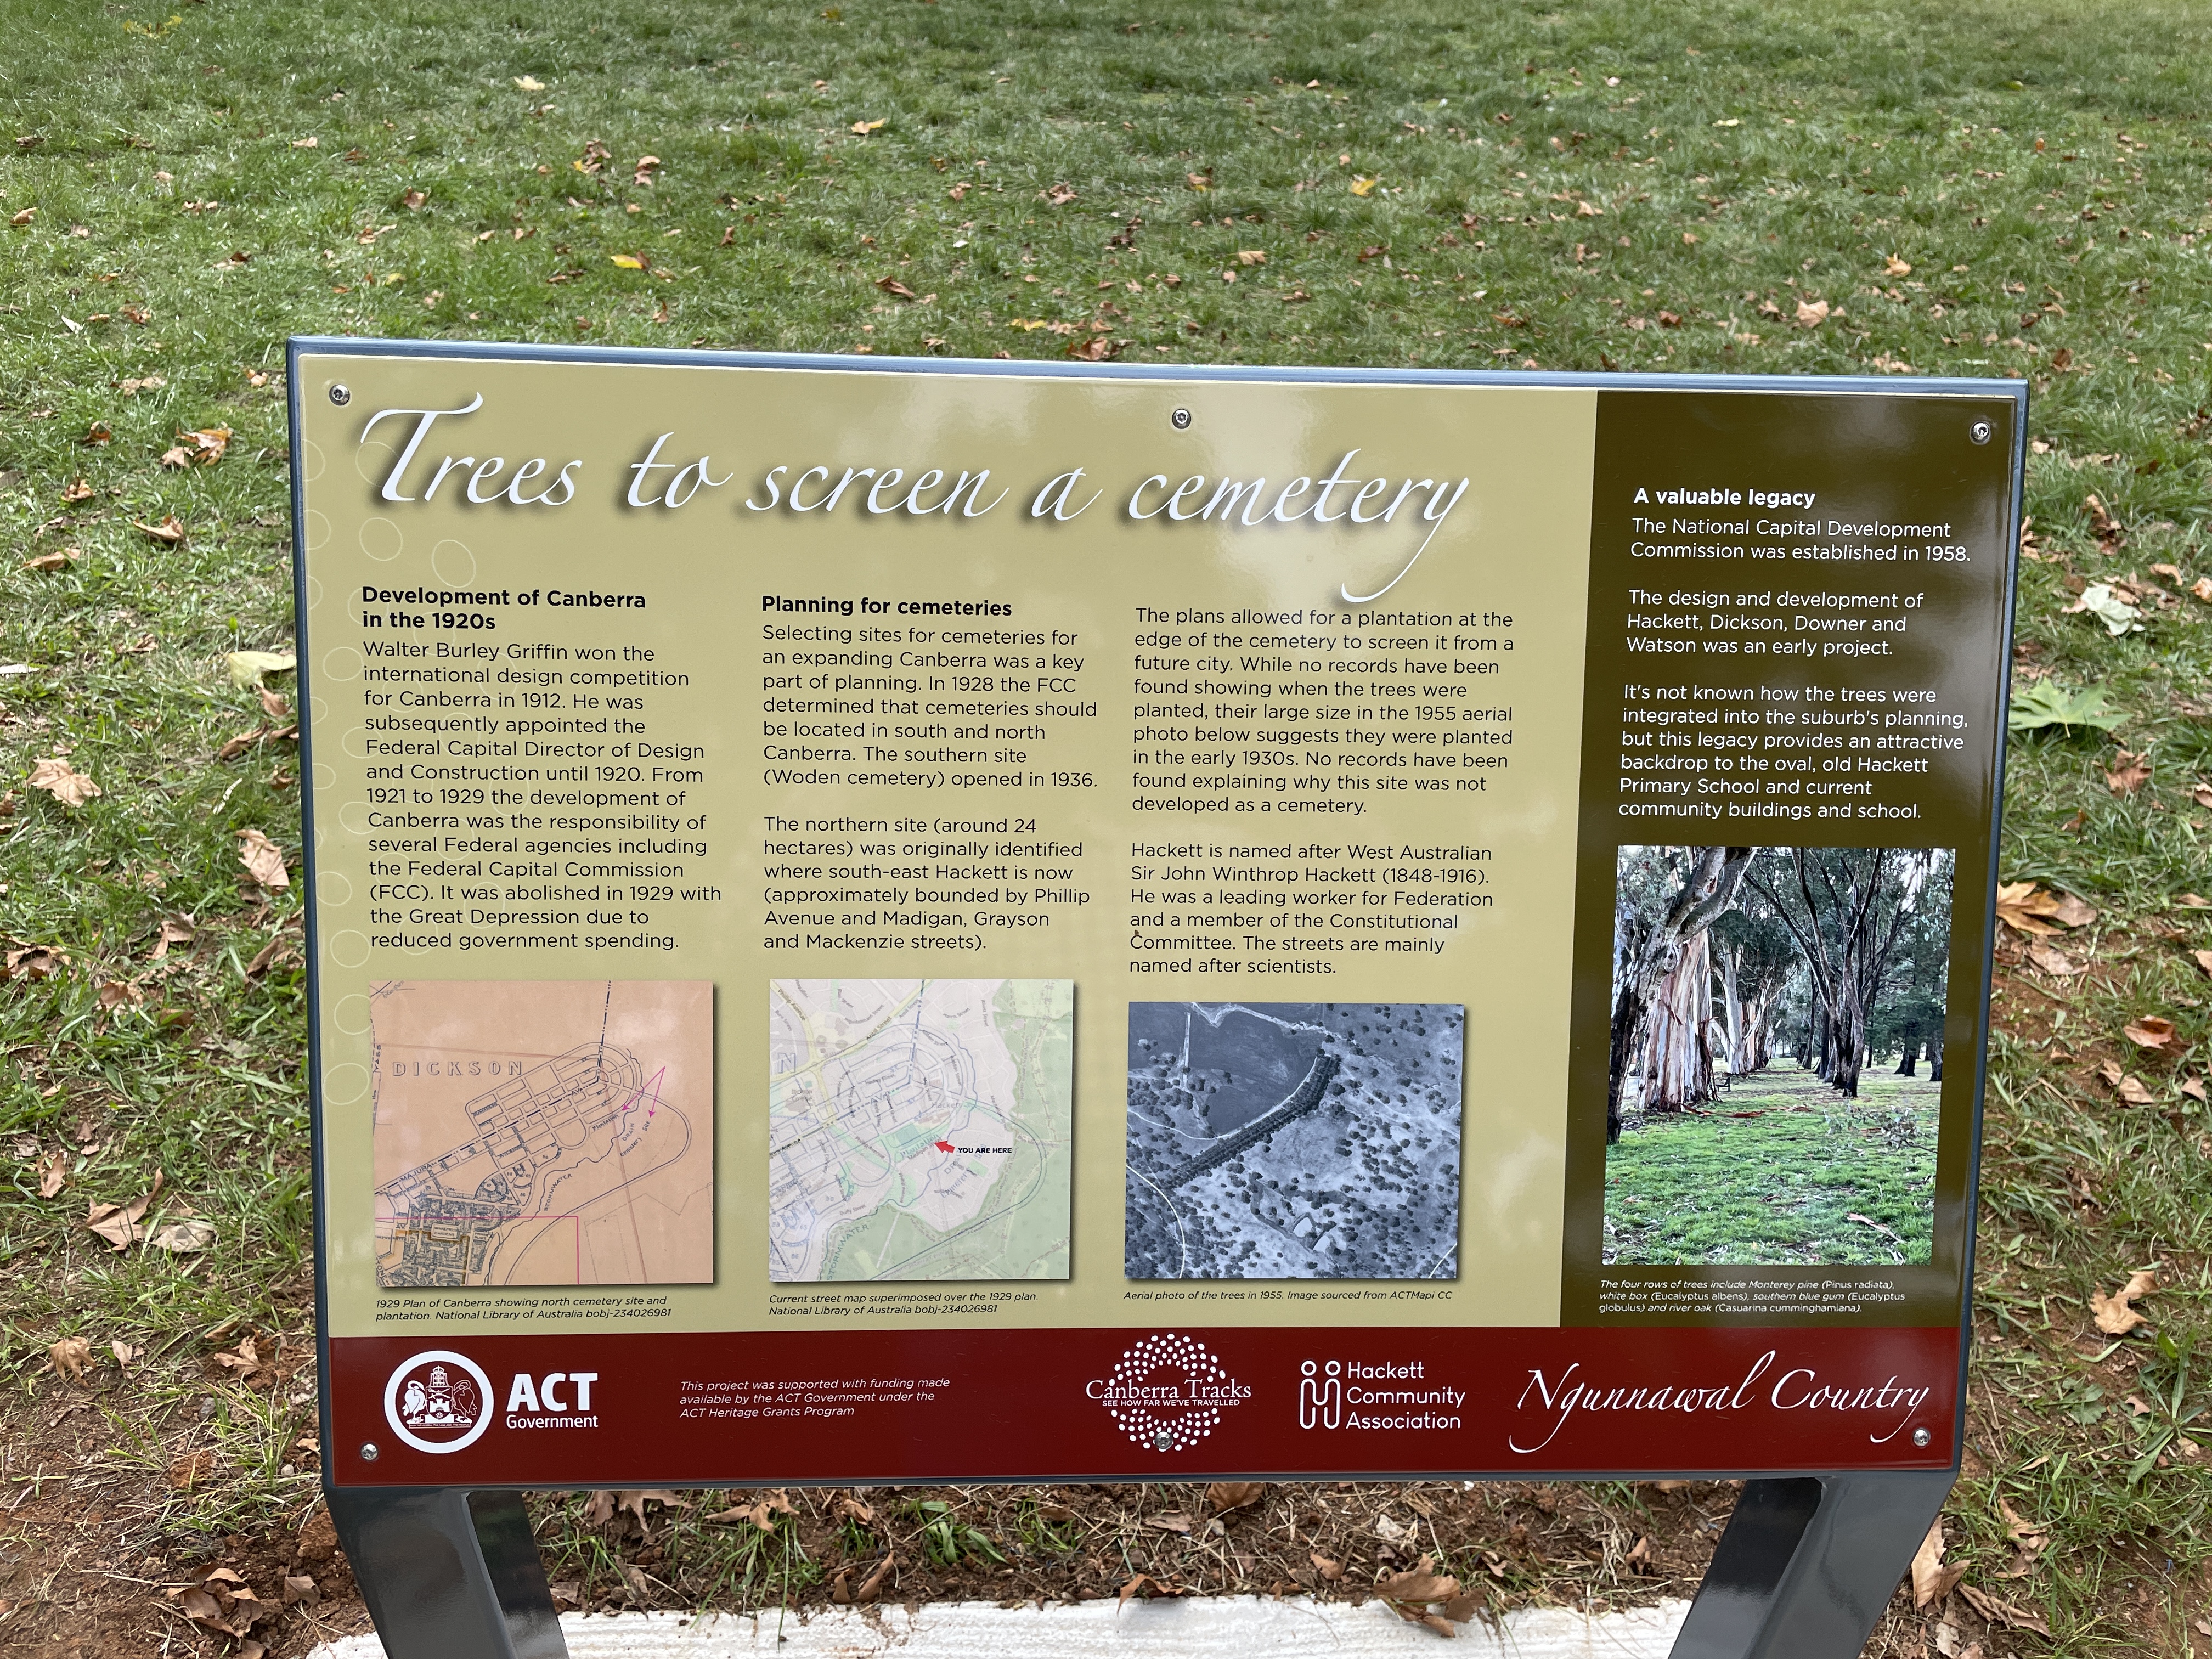 metal sign in a park showing historical images and maps, and telling the story of the trees' history